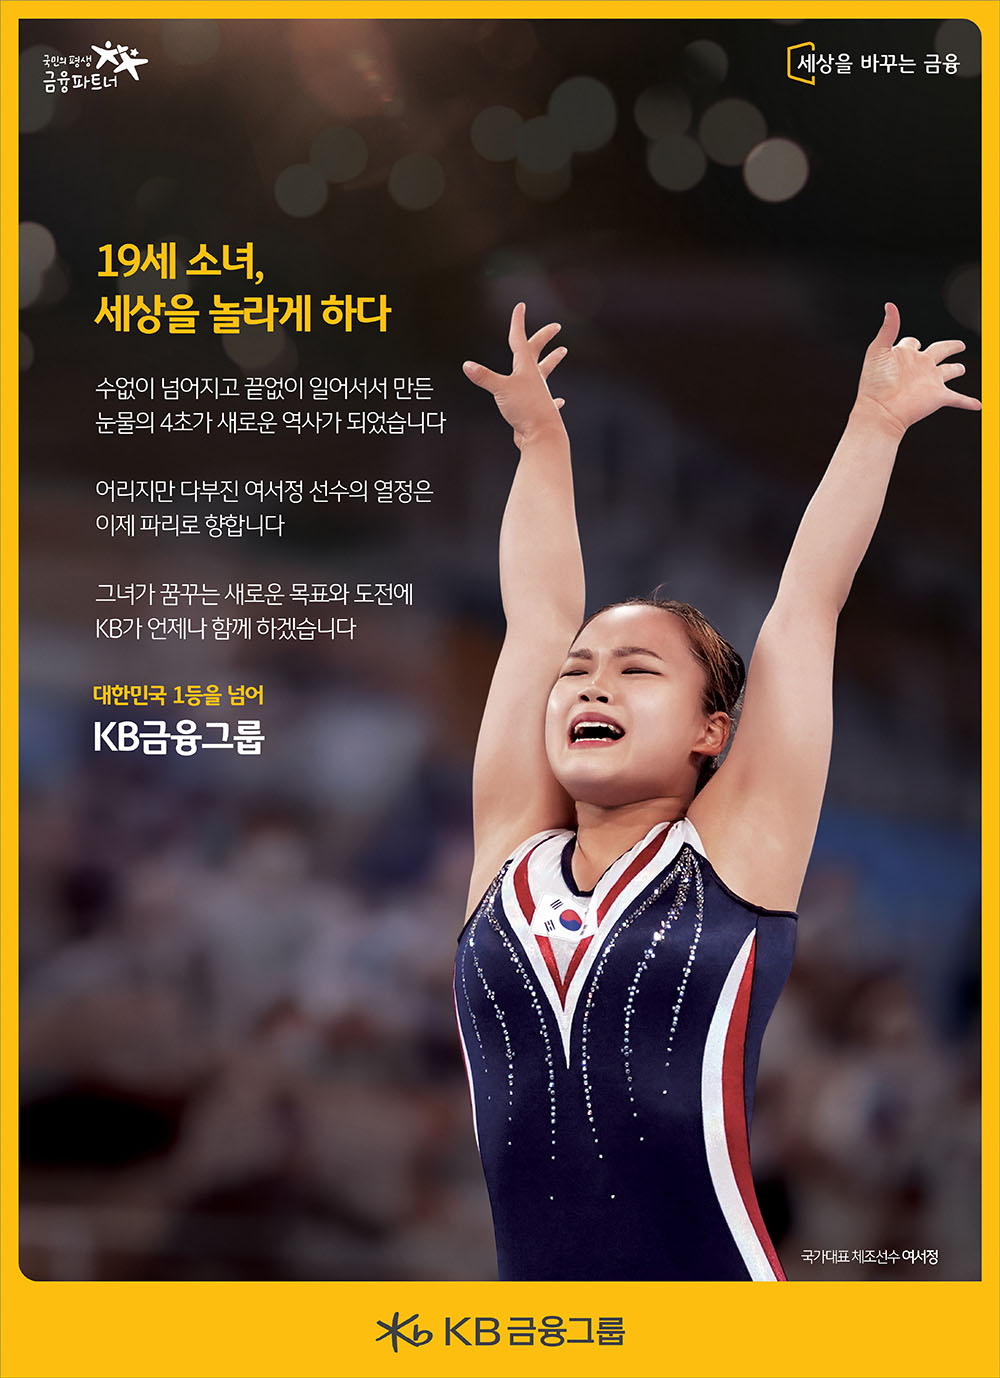 KB appluads athletes of KB who competed at Tokyo - Seo Jeong Yeo